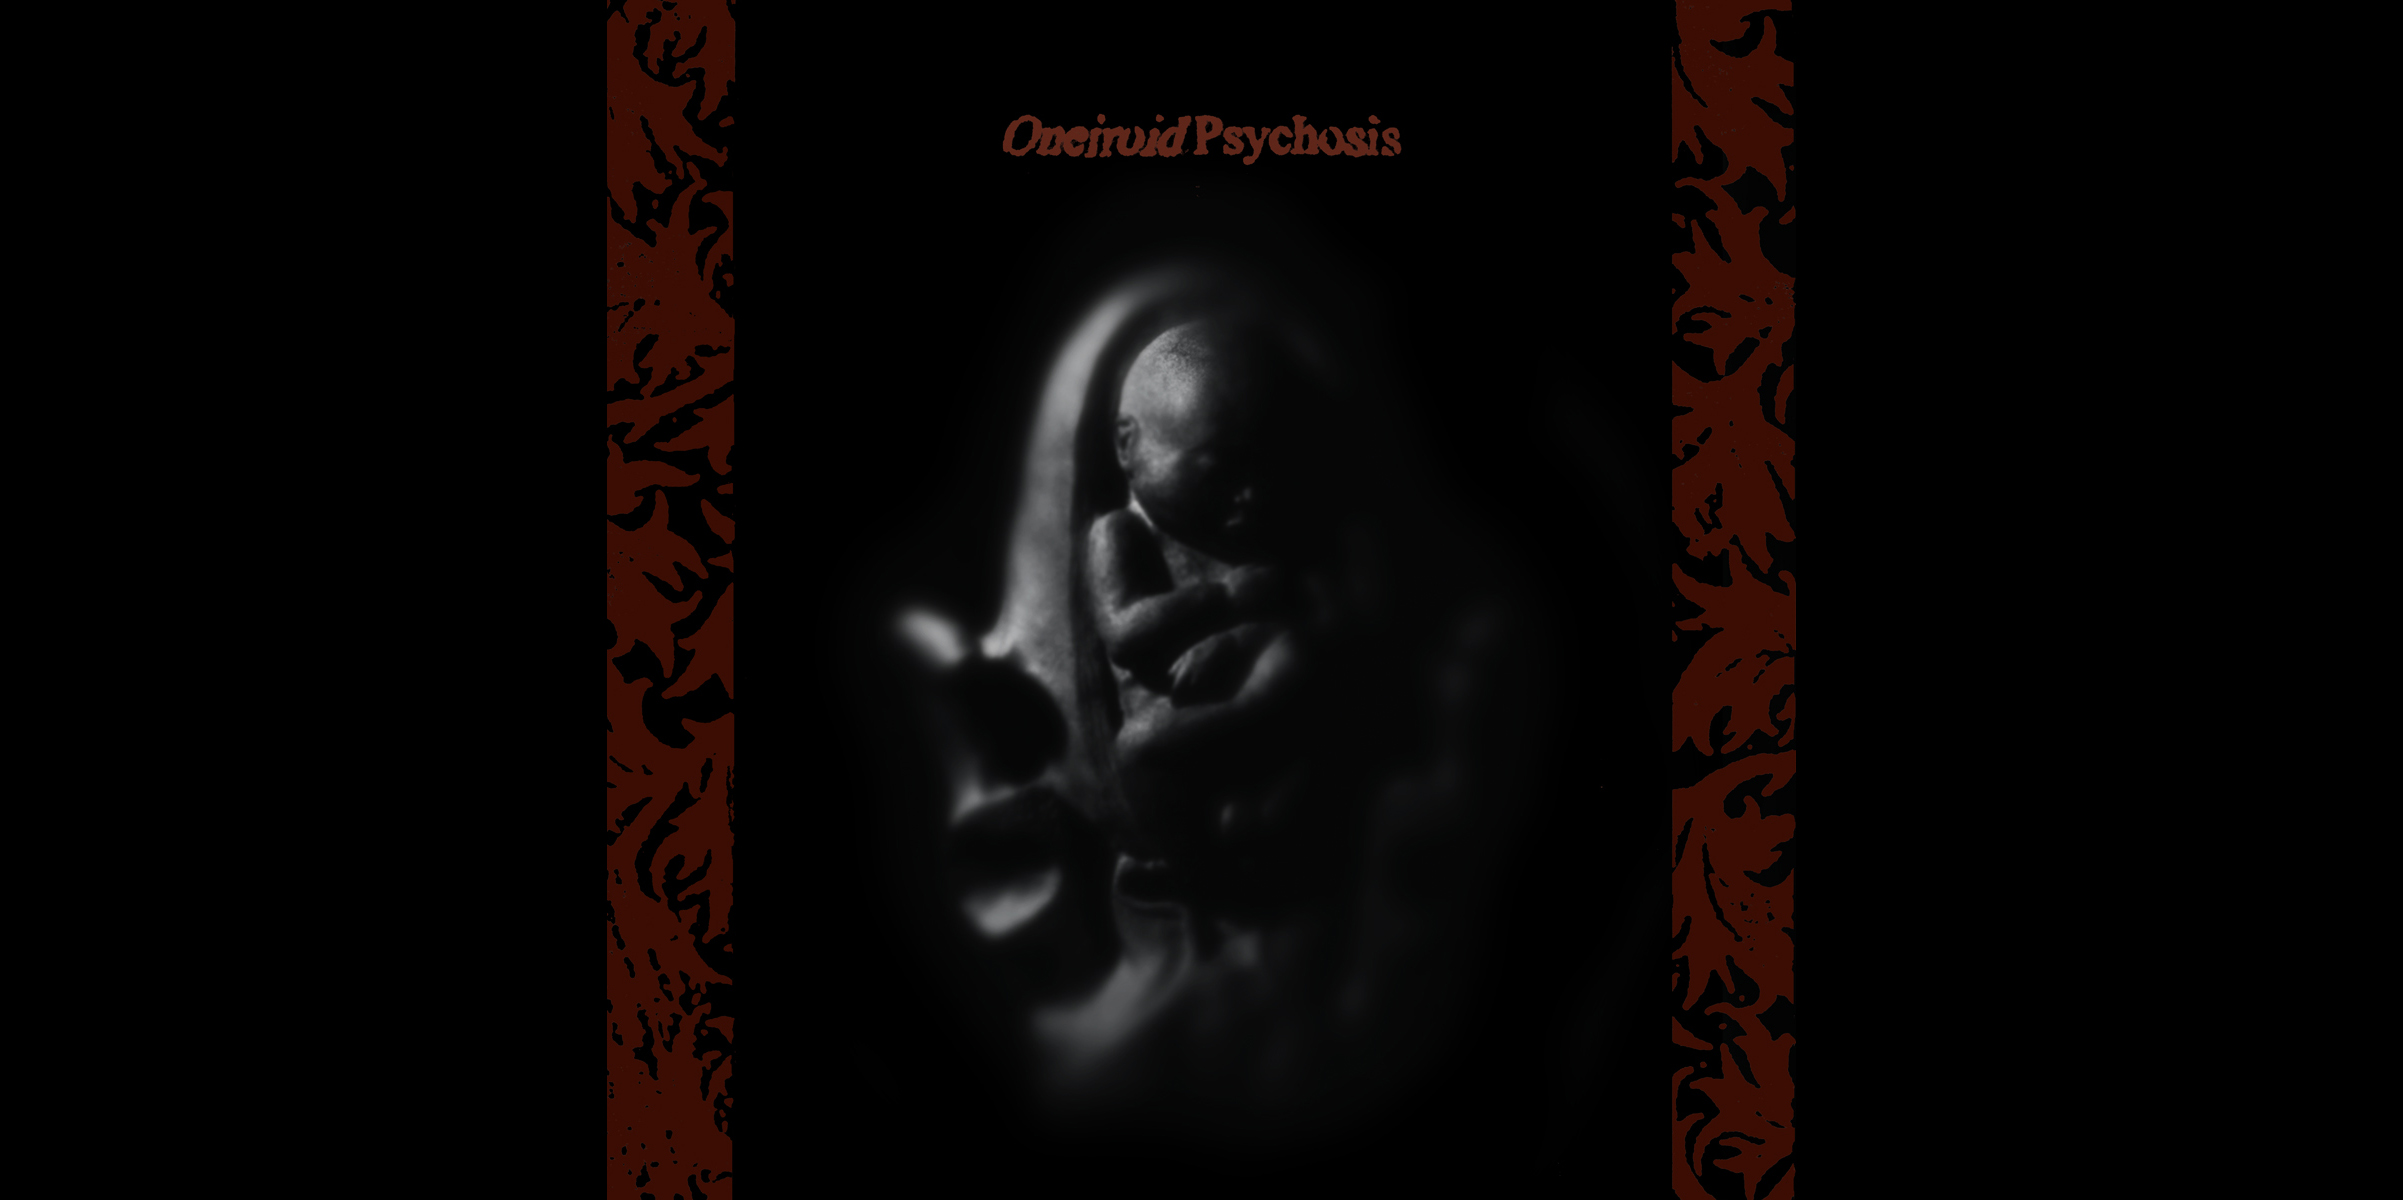   Oneiroid Psychosis,  Stillbirth . CD Booklet Cover . 1995. Sculpted clay fetus and womb, Photography, Pen and ink. Released by Decibel Records. 